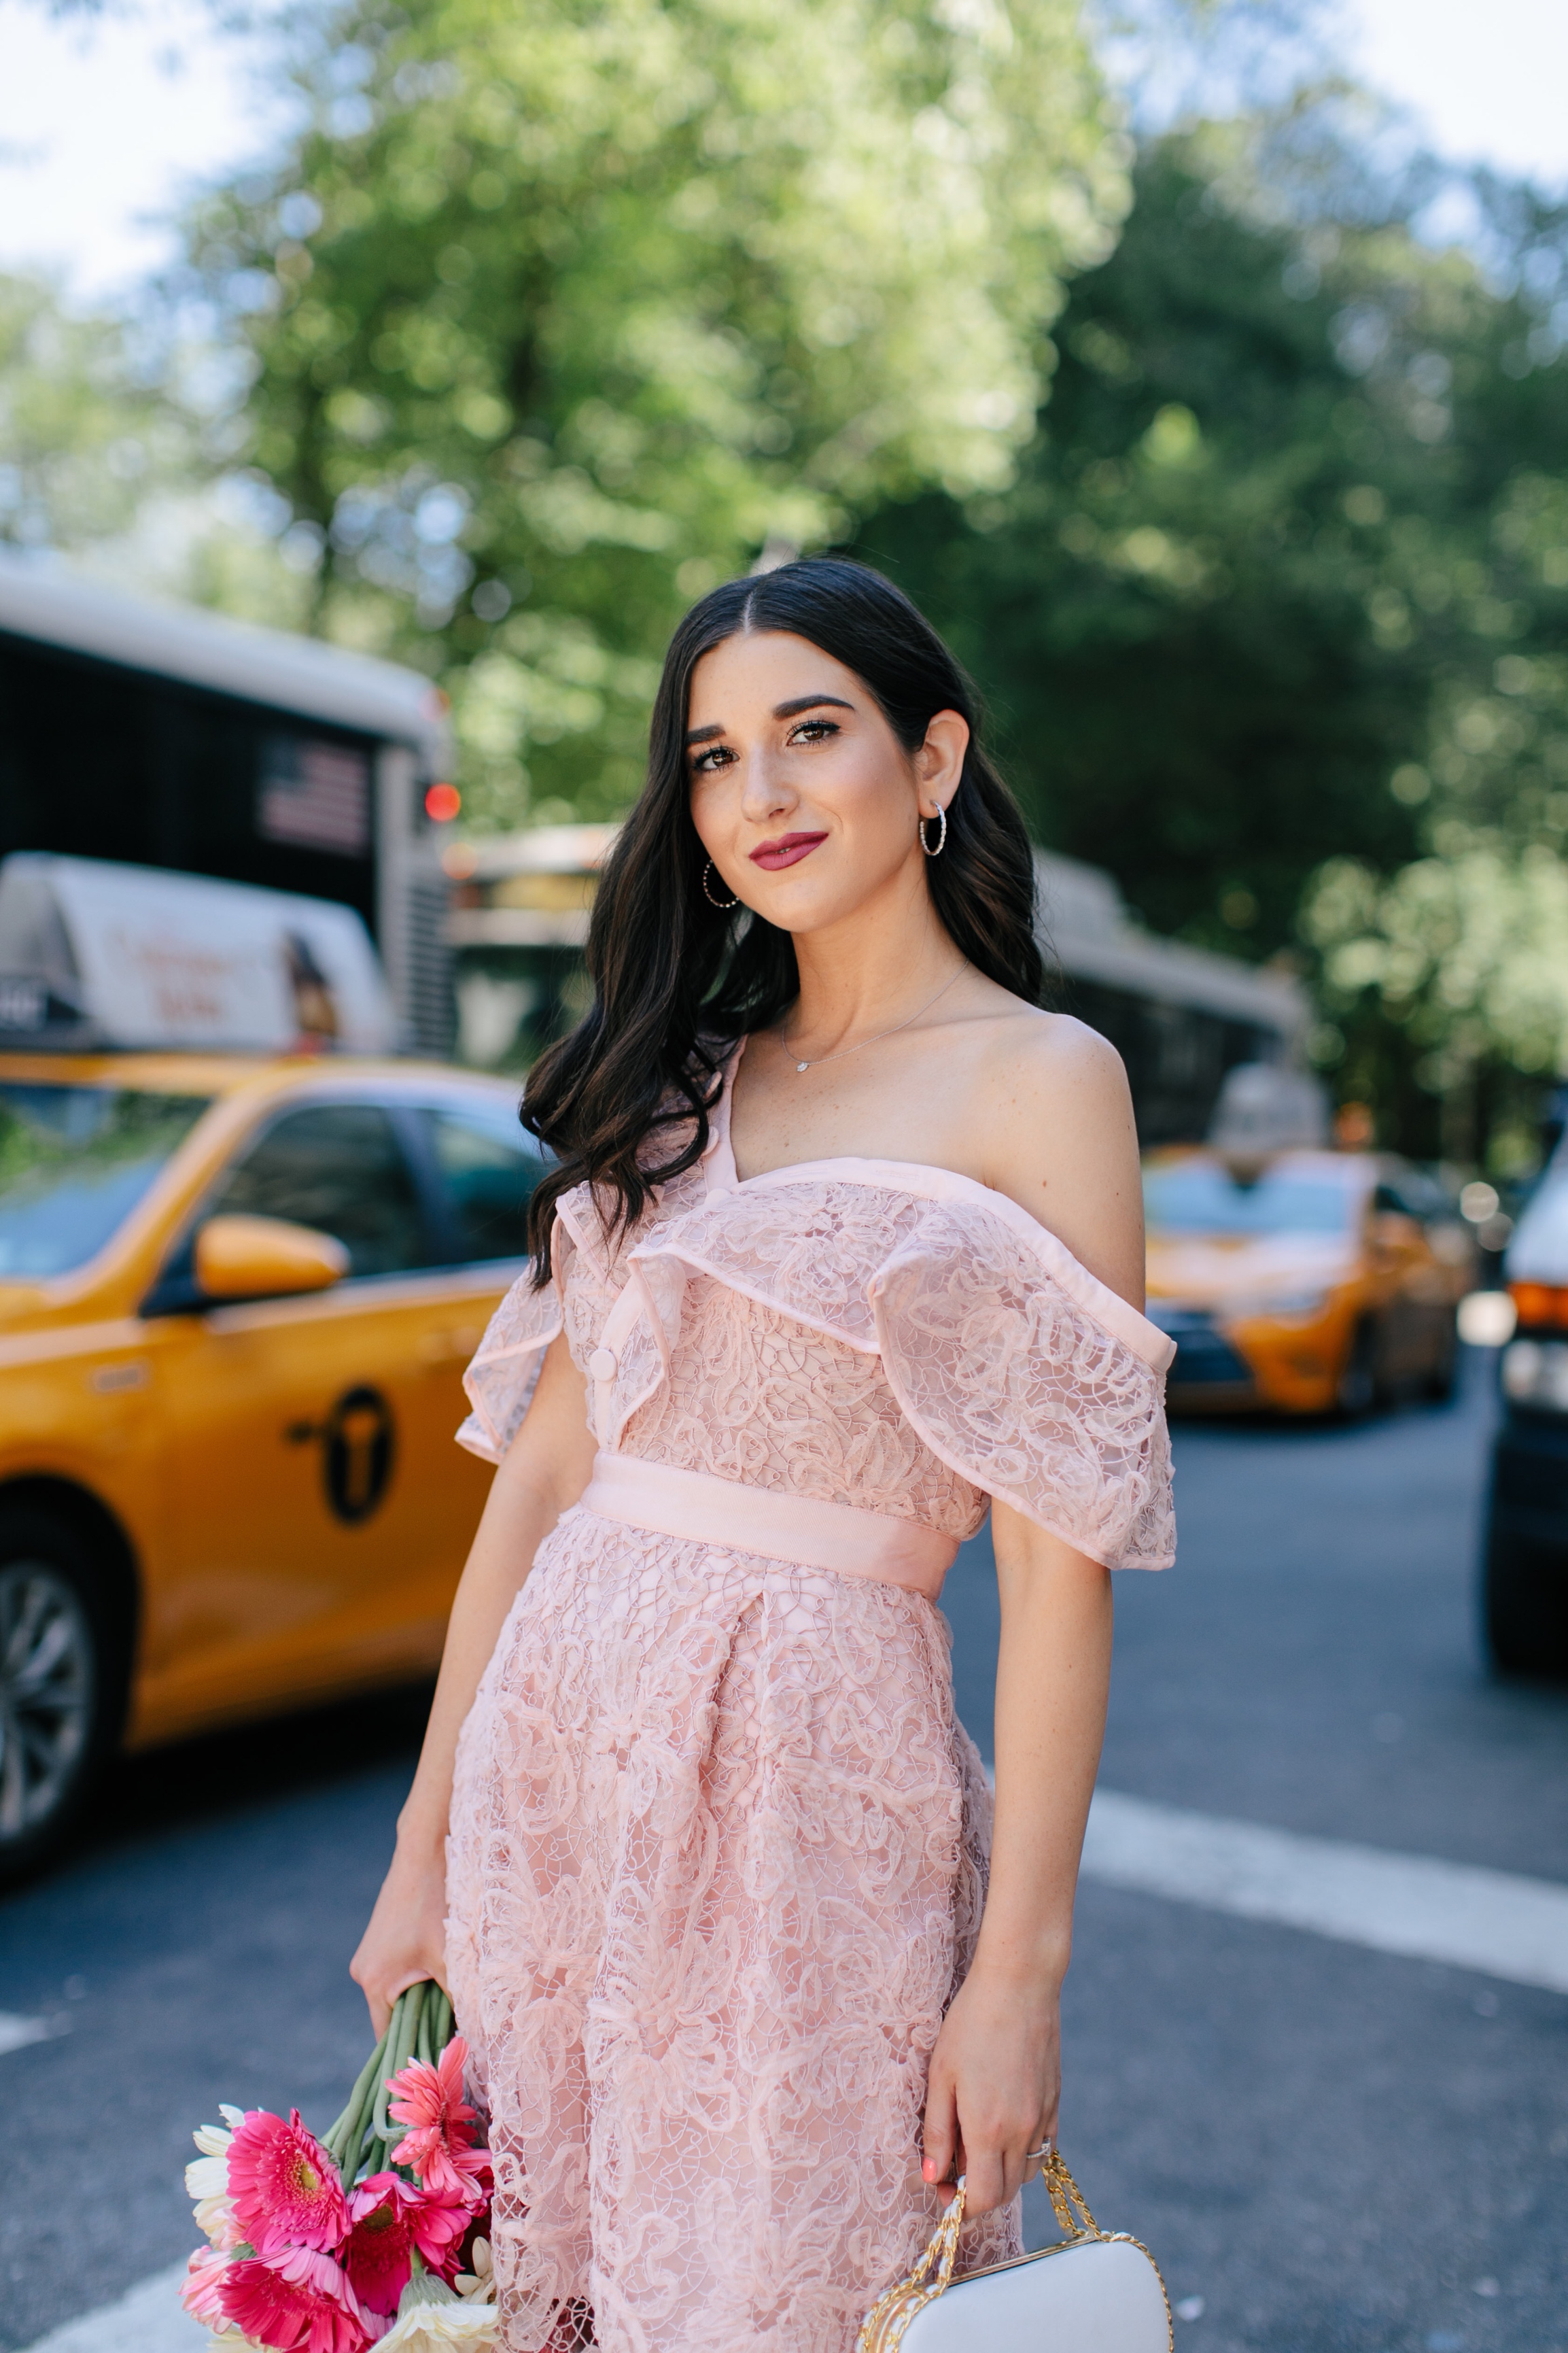 A New Perspective On Instagram Jealousy Pink Lace Dress Ivory Bow Heels Esther Santer Fashion Blog NYC Street Style Blogger Outfit OOTD Trendy White Bag Clutch Self Portrait Designer Kate Spade Wedding Shoes Fancy Elegant Feminine Formal Wear Shopping.jpg